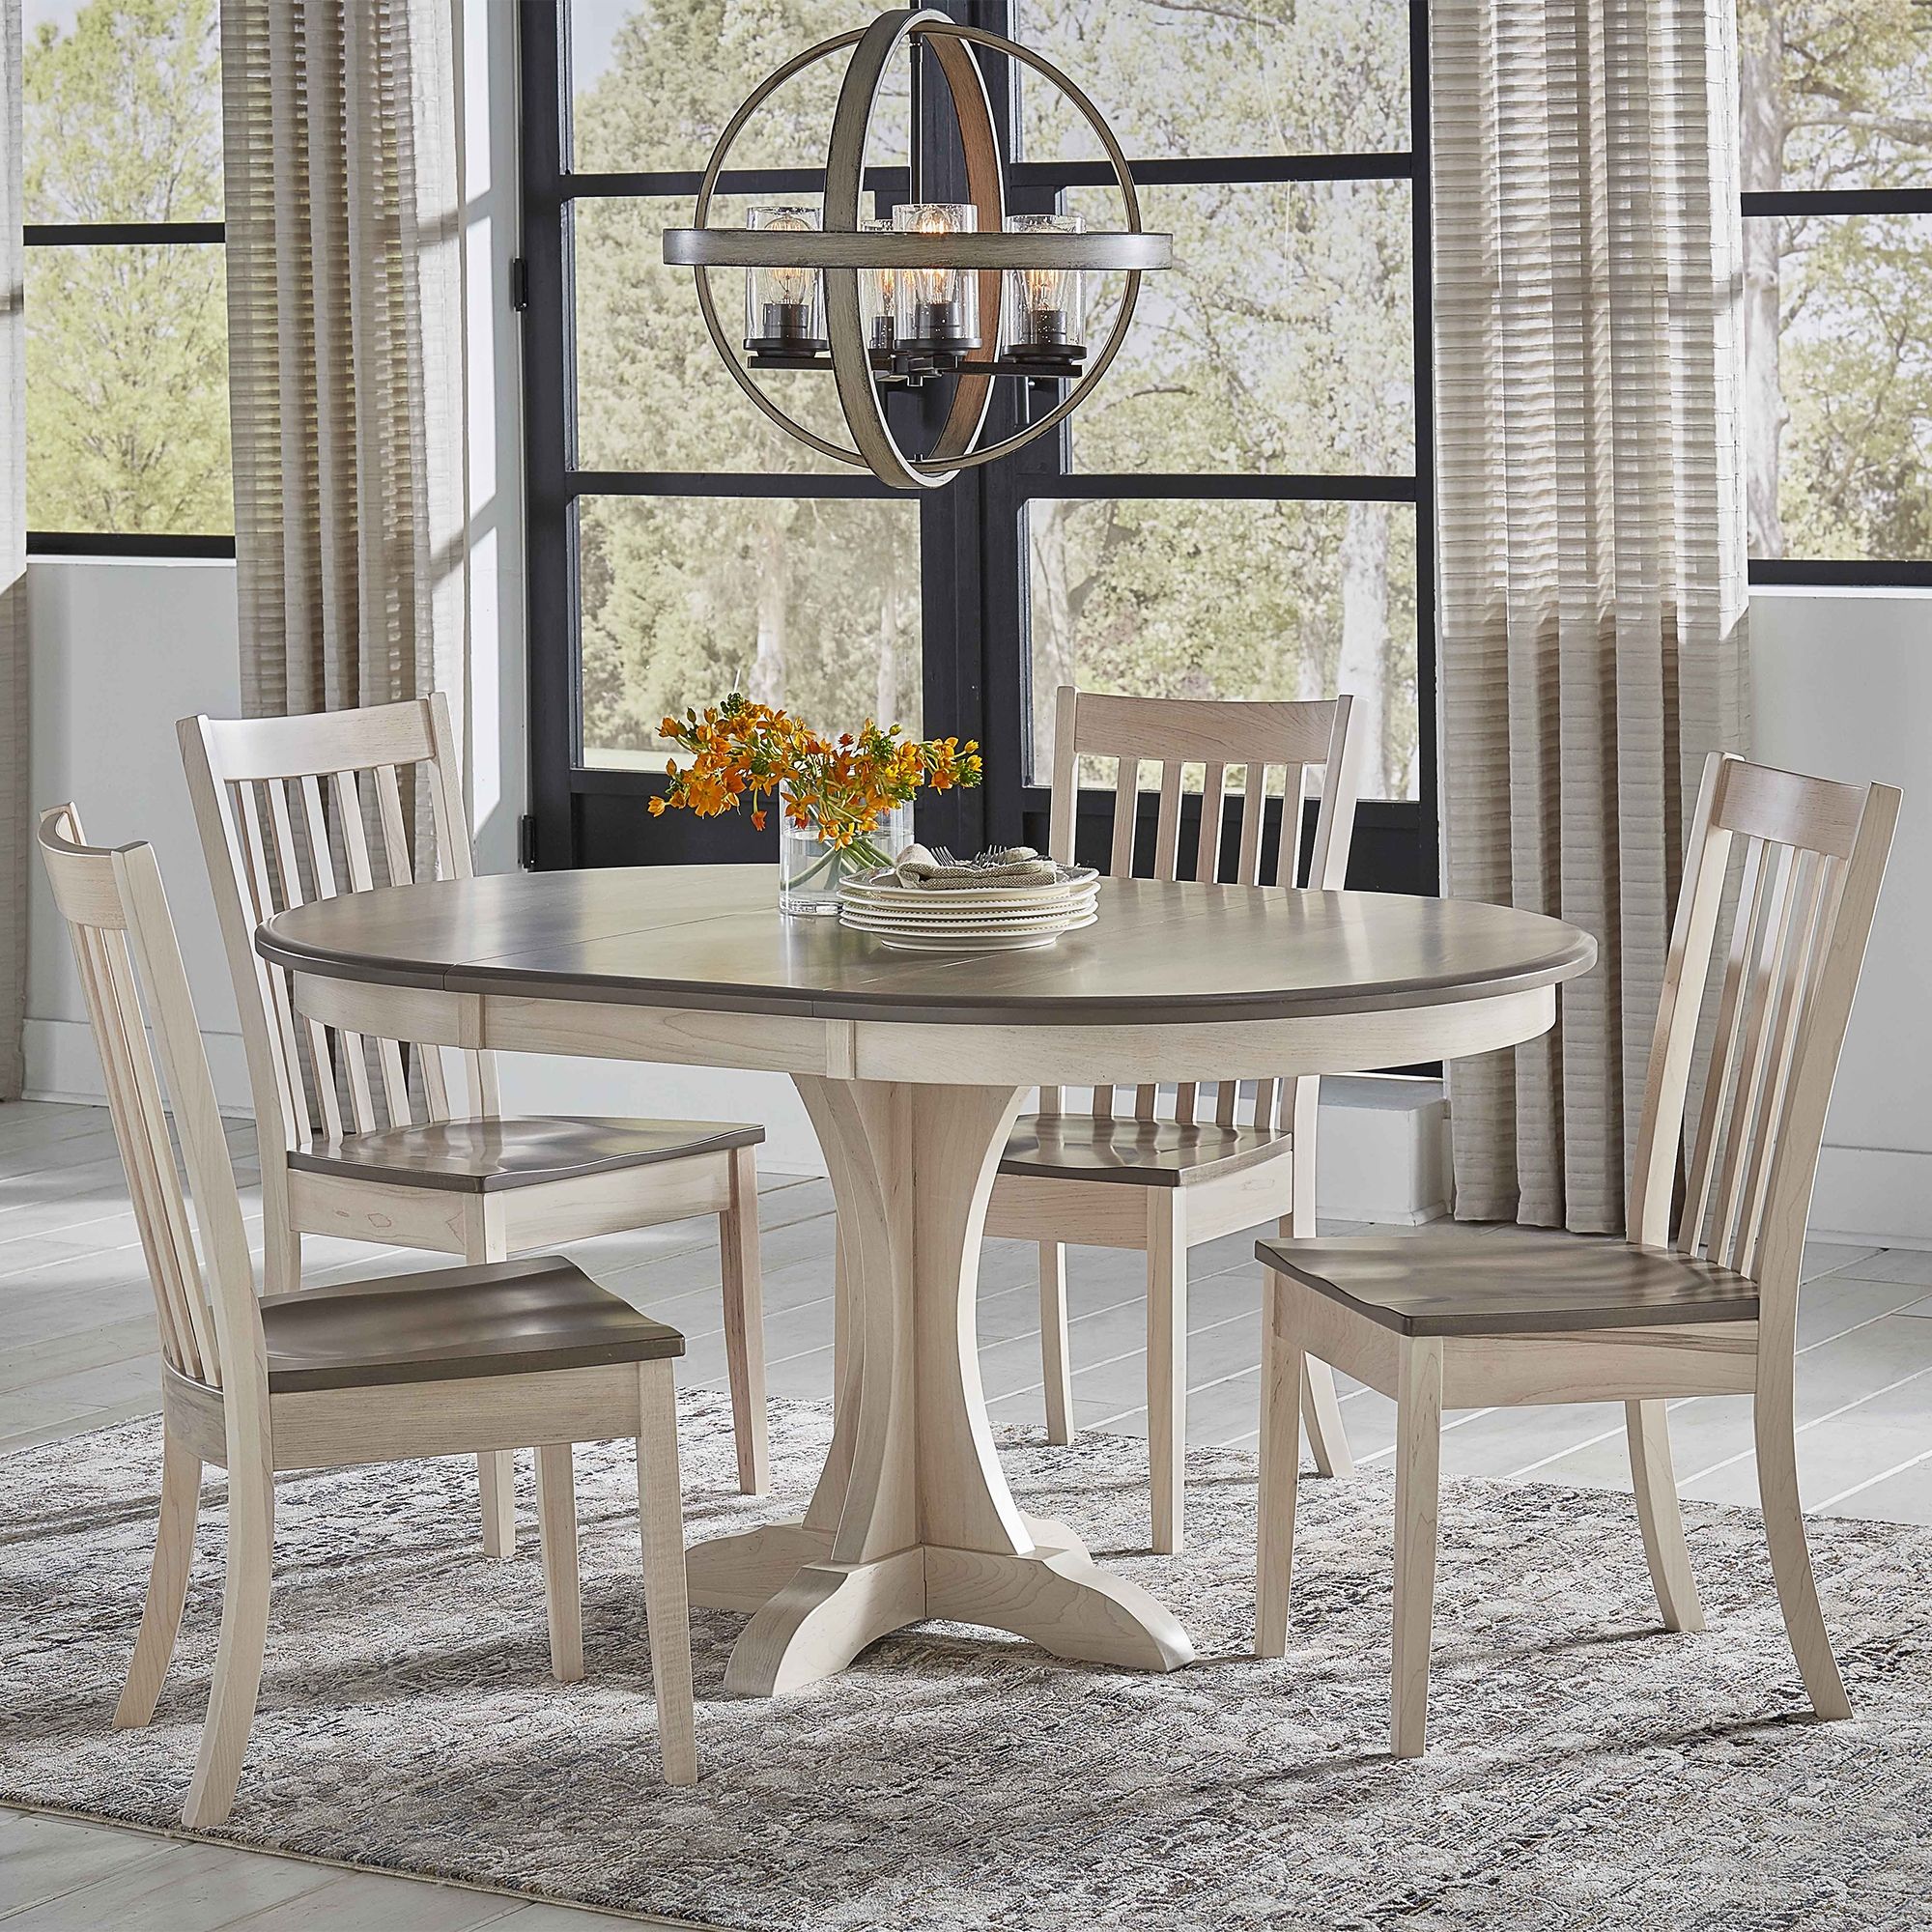 Driftwood Maple 5 Piece Dining Set, Round Table Dining Set For 5